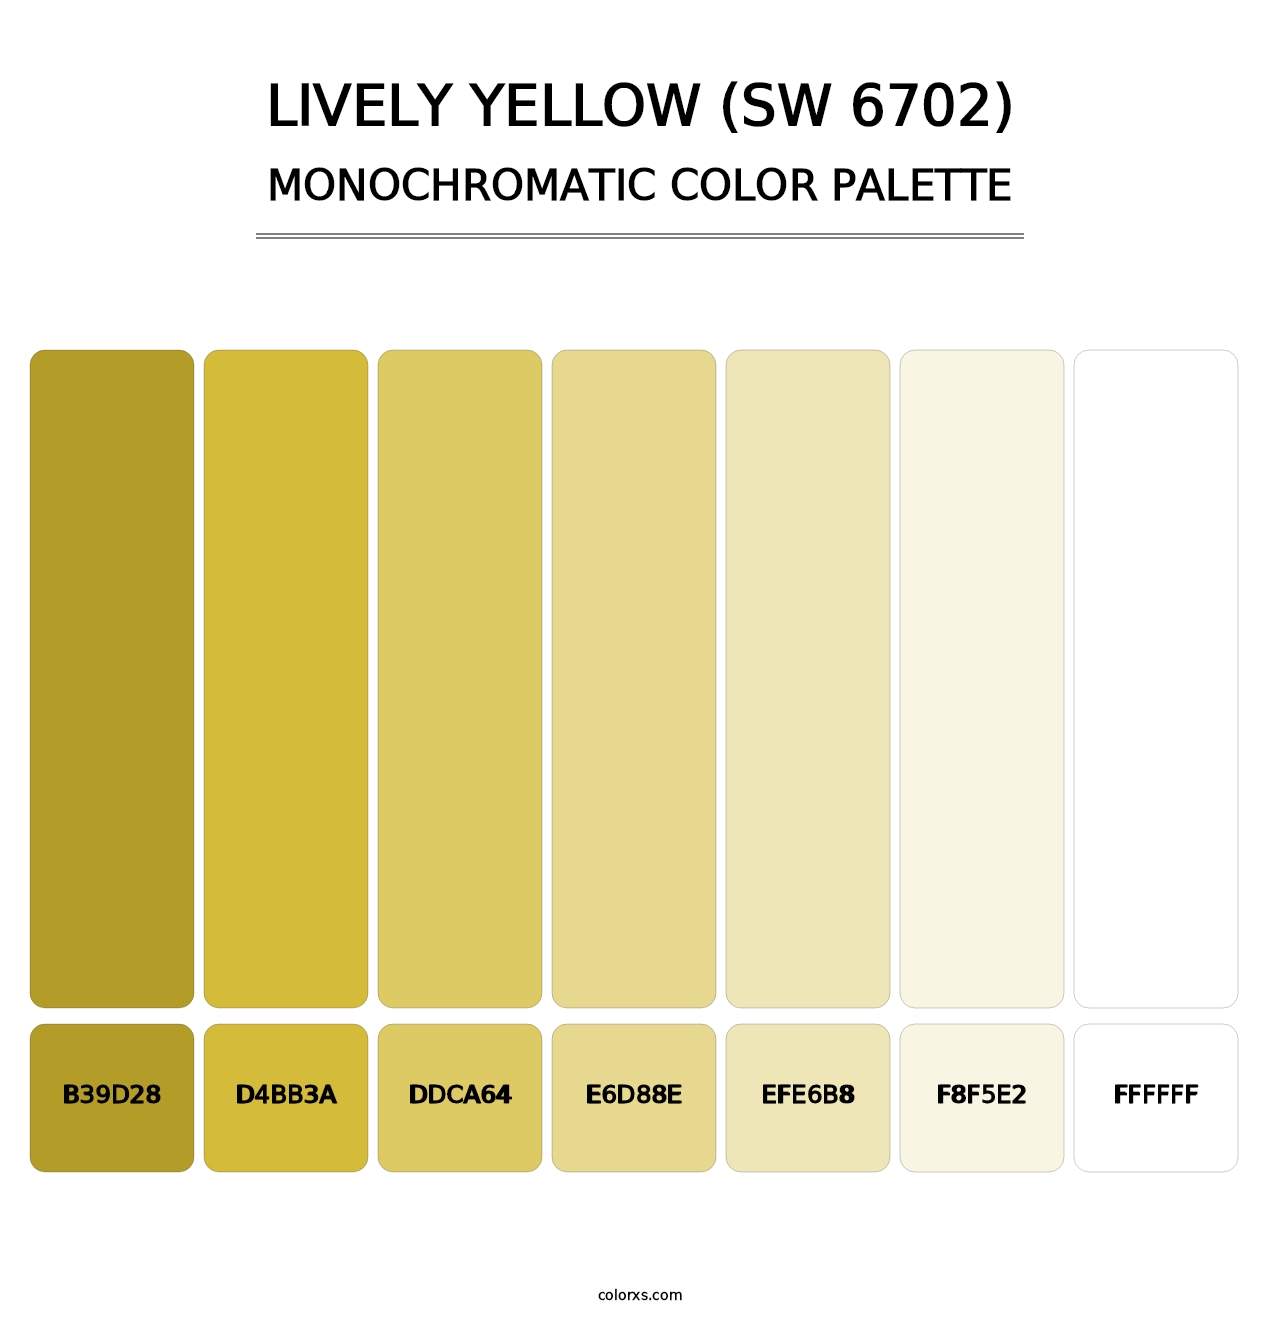 Lively Yellow (SW 6702) - Monochromatic Color Palette